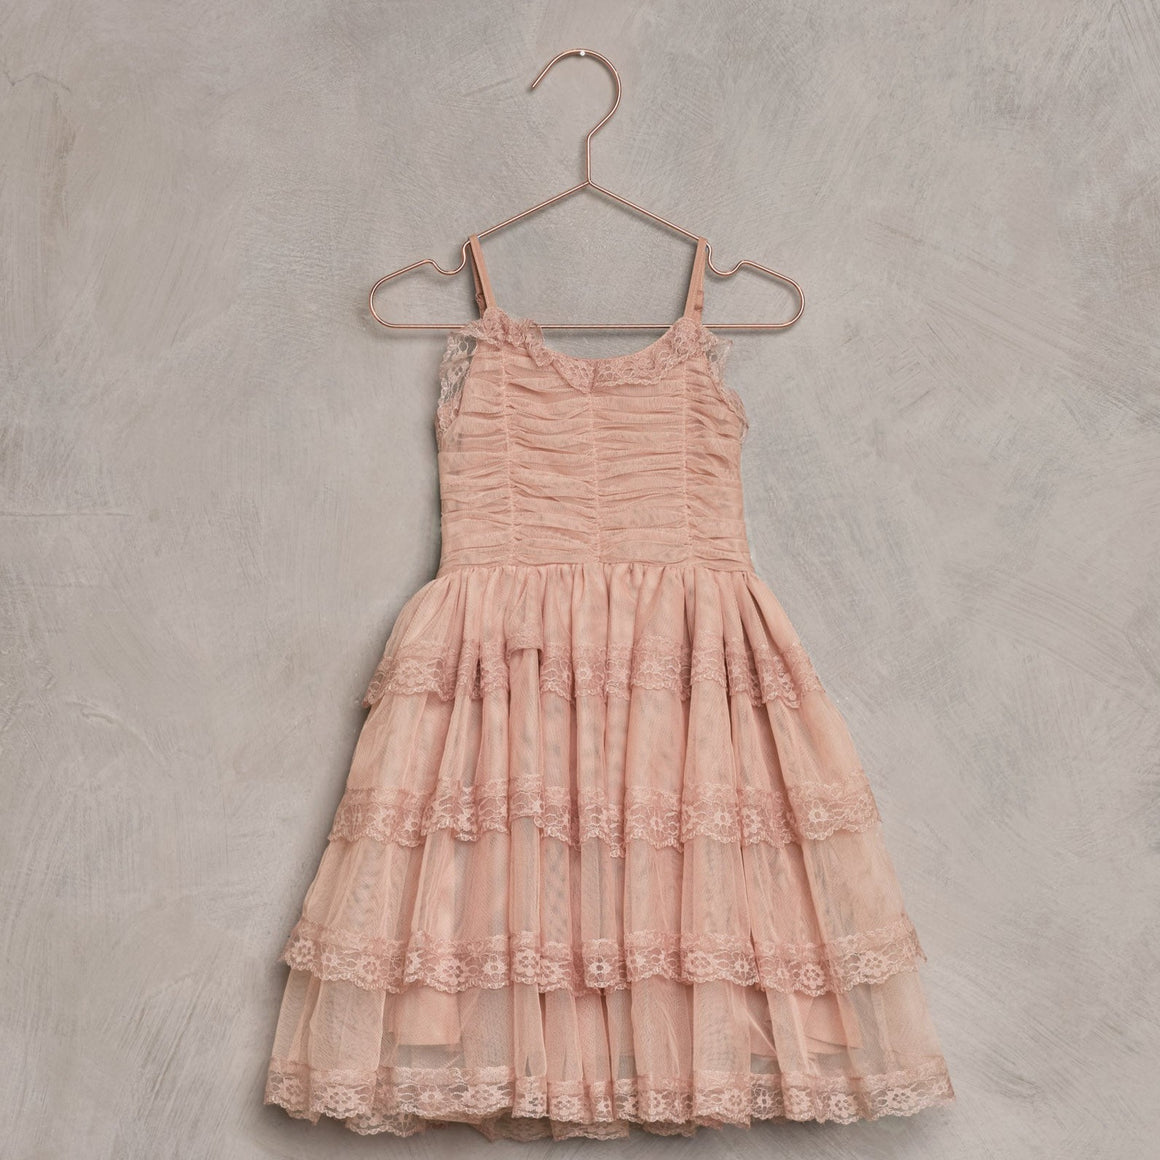 Noralee Audrey Dress - Dusty Rose